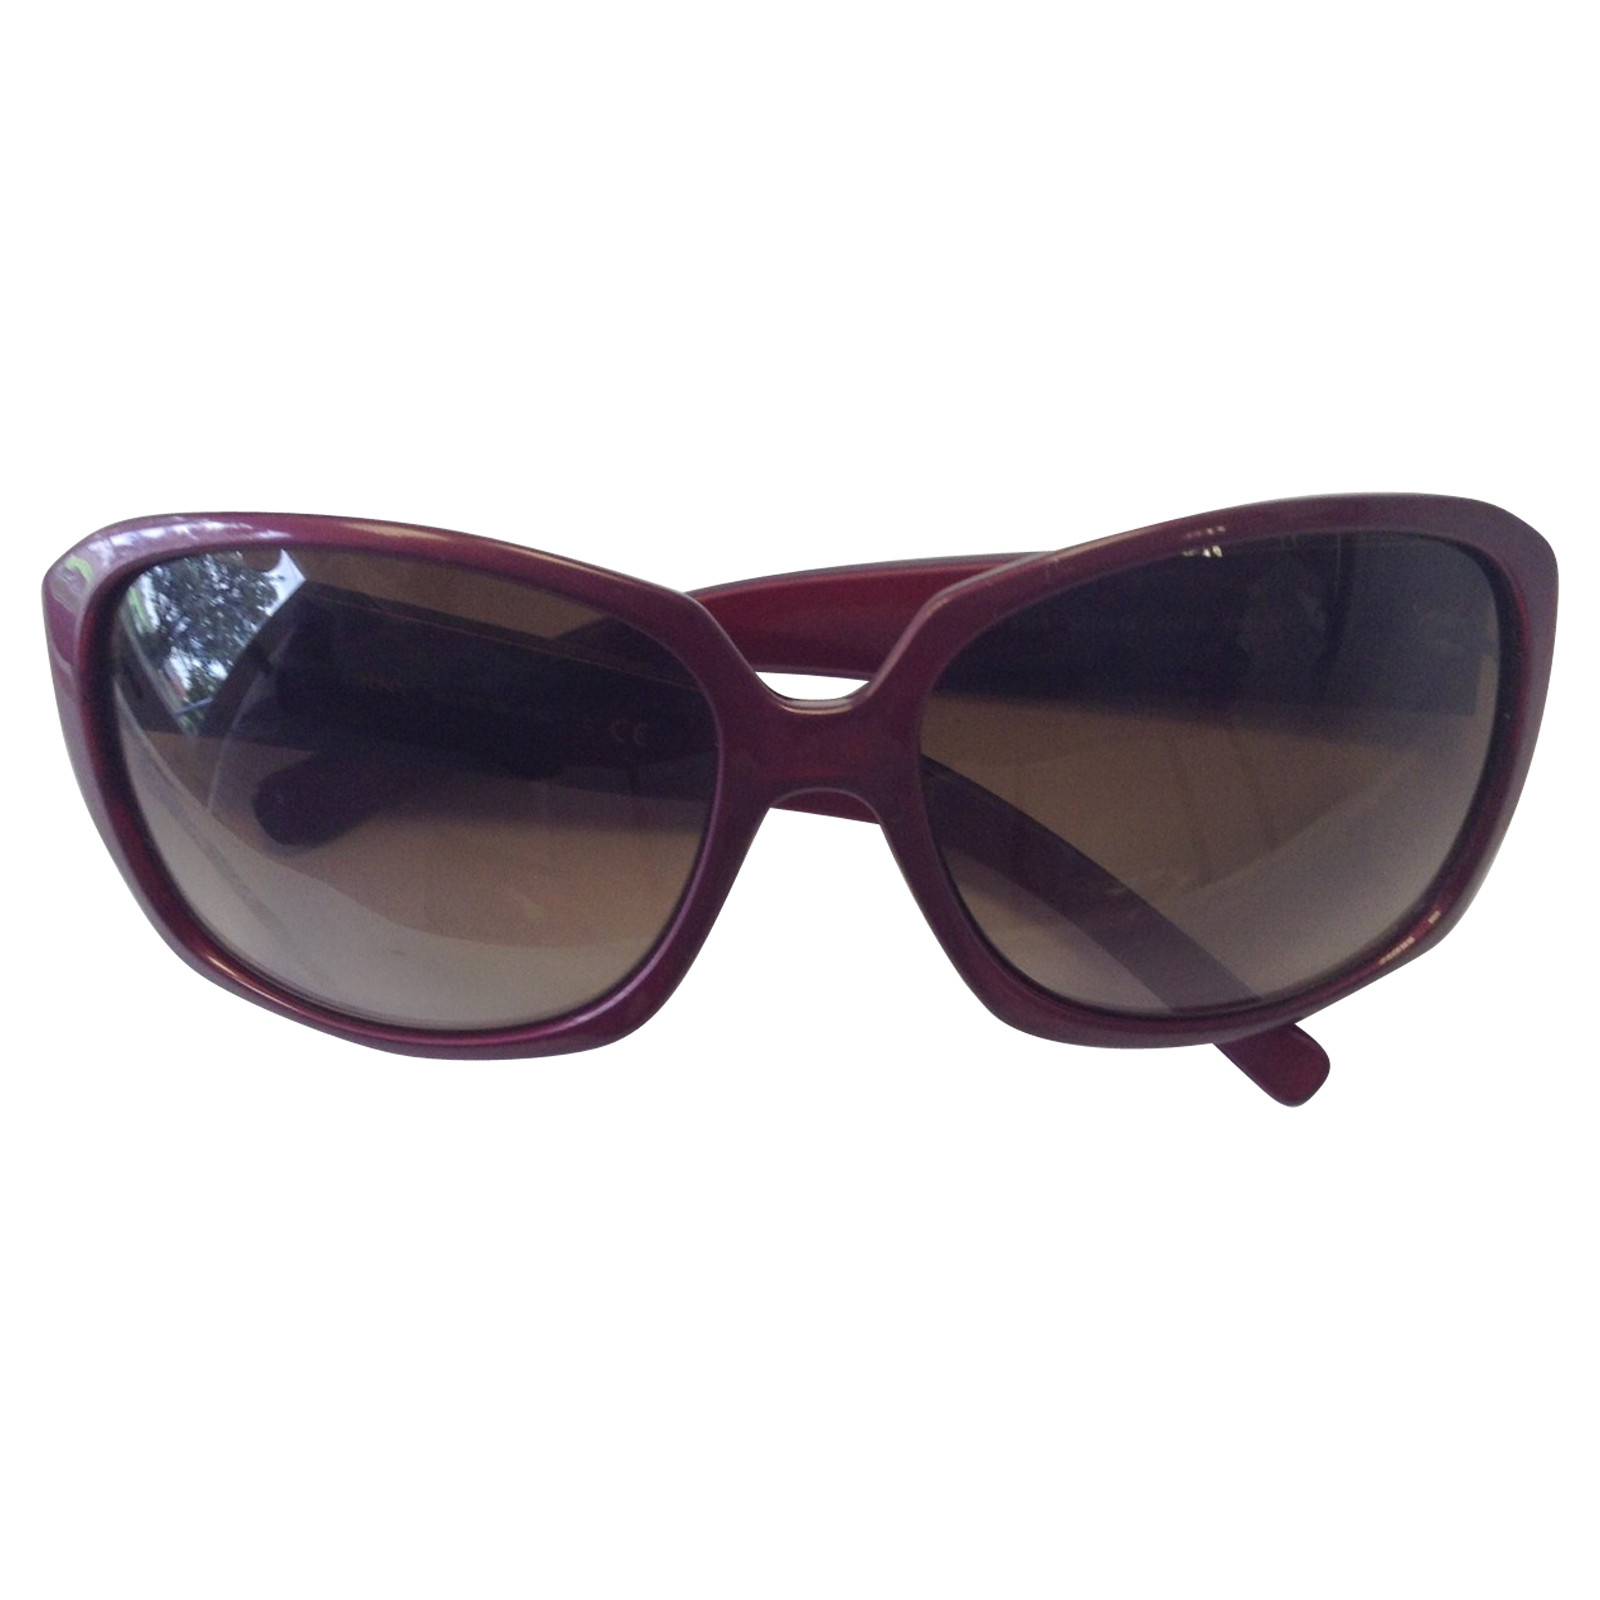 Dkny Sonnenbrille in Fuchsia - Second Hand Dkny Sonnenbrille in Fuchsia  gebraucht kaufen für 59€ (3811662)